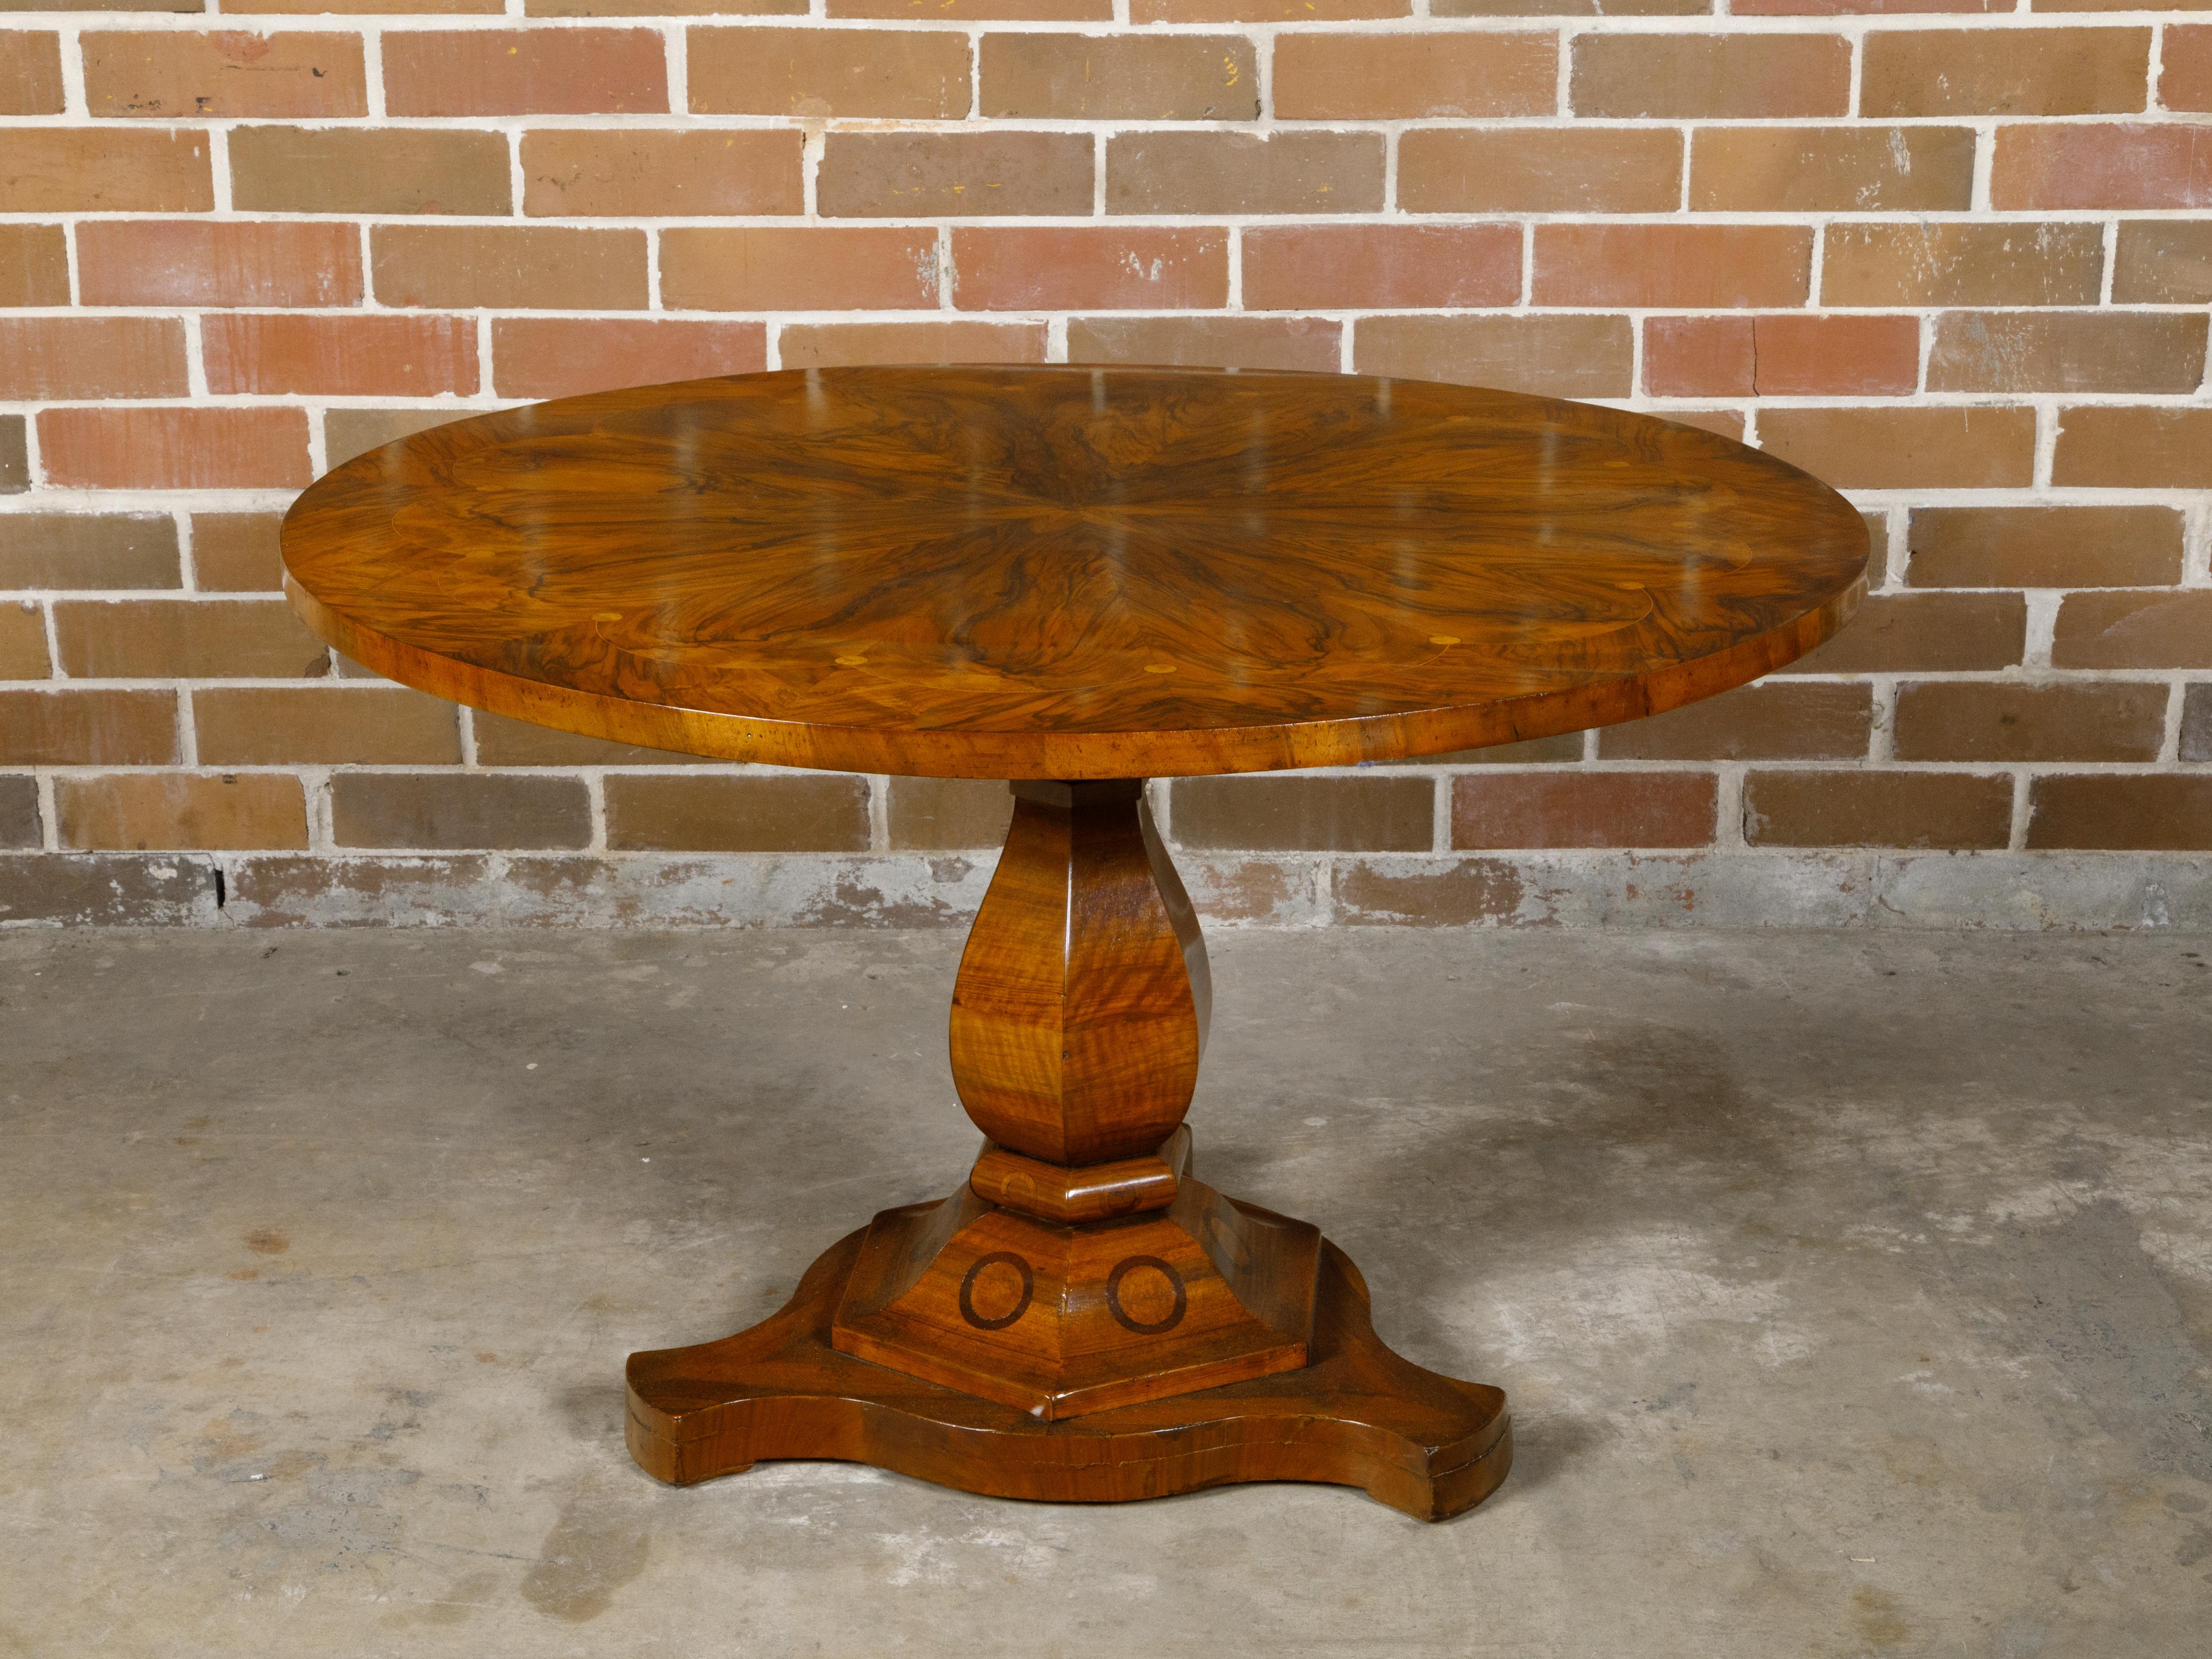 A Biedermeier period table from the 19th century with flame walnut circular top adorned with exquisite radiating motif and raised on pedestal base. This exquisite Biedermeier period table, dating back to the 19th century, showcases the era's refined